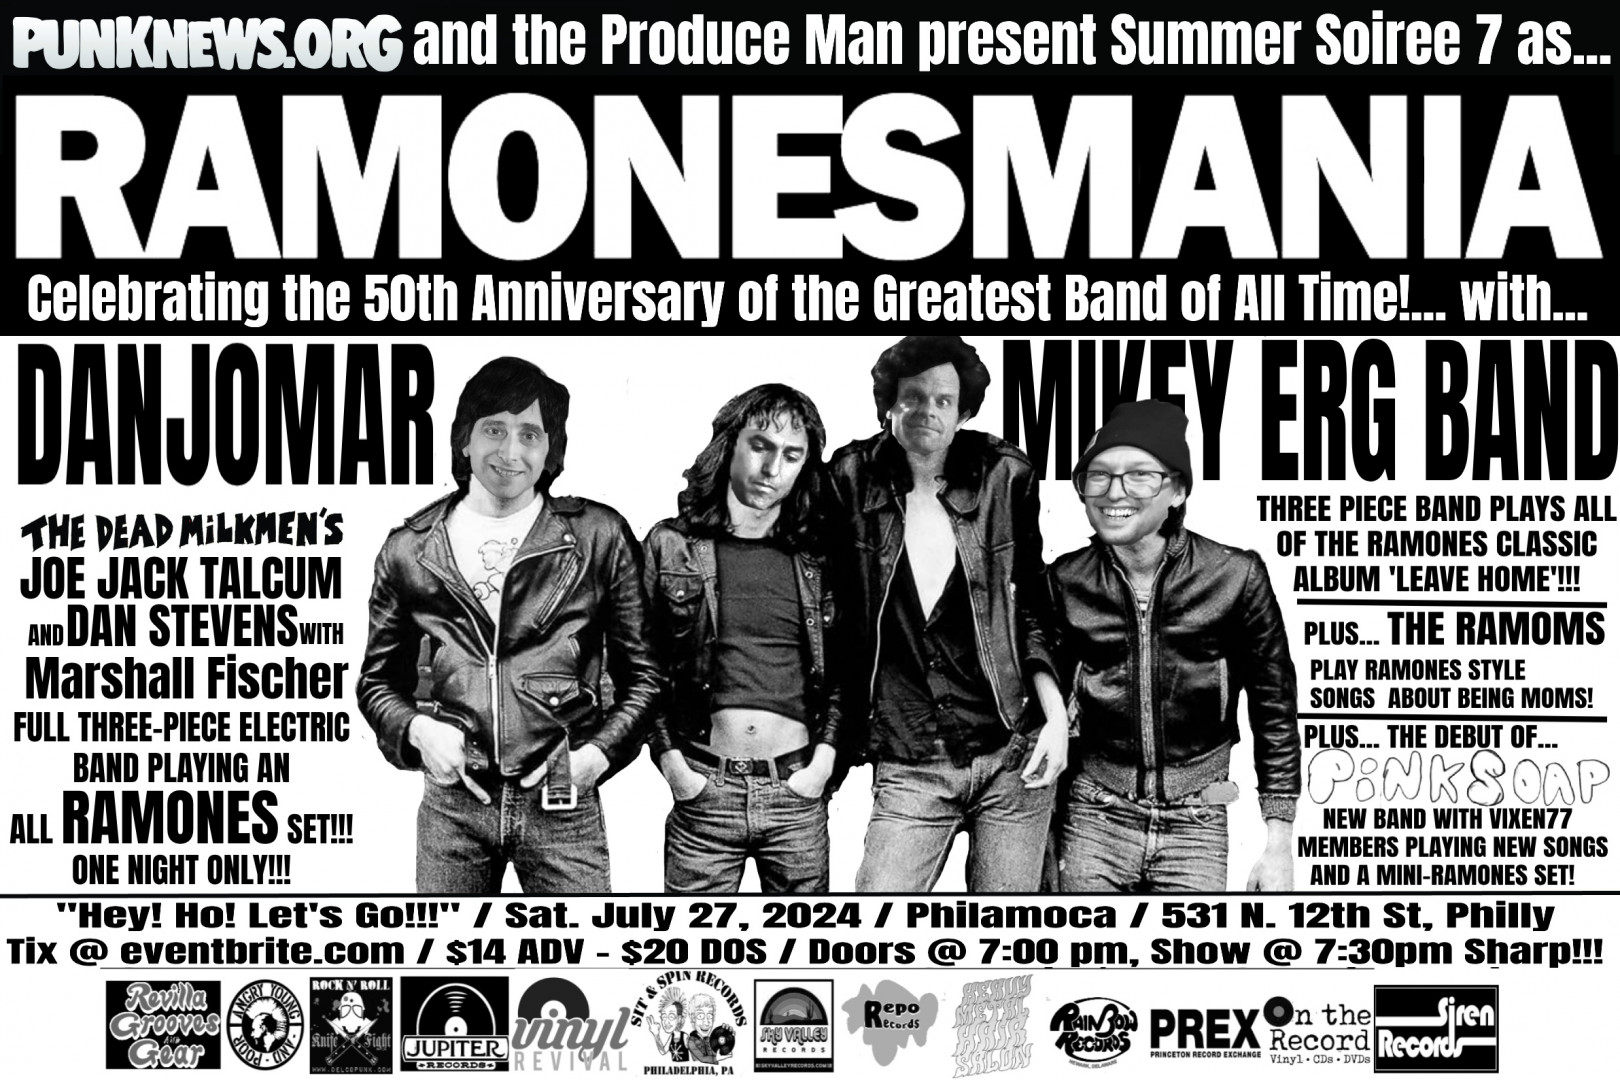 Surprise! The full MIKEY ERG BAND plays Ramonesmania in Philly! PLUS Pink Soap makes their debut!